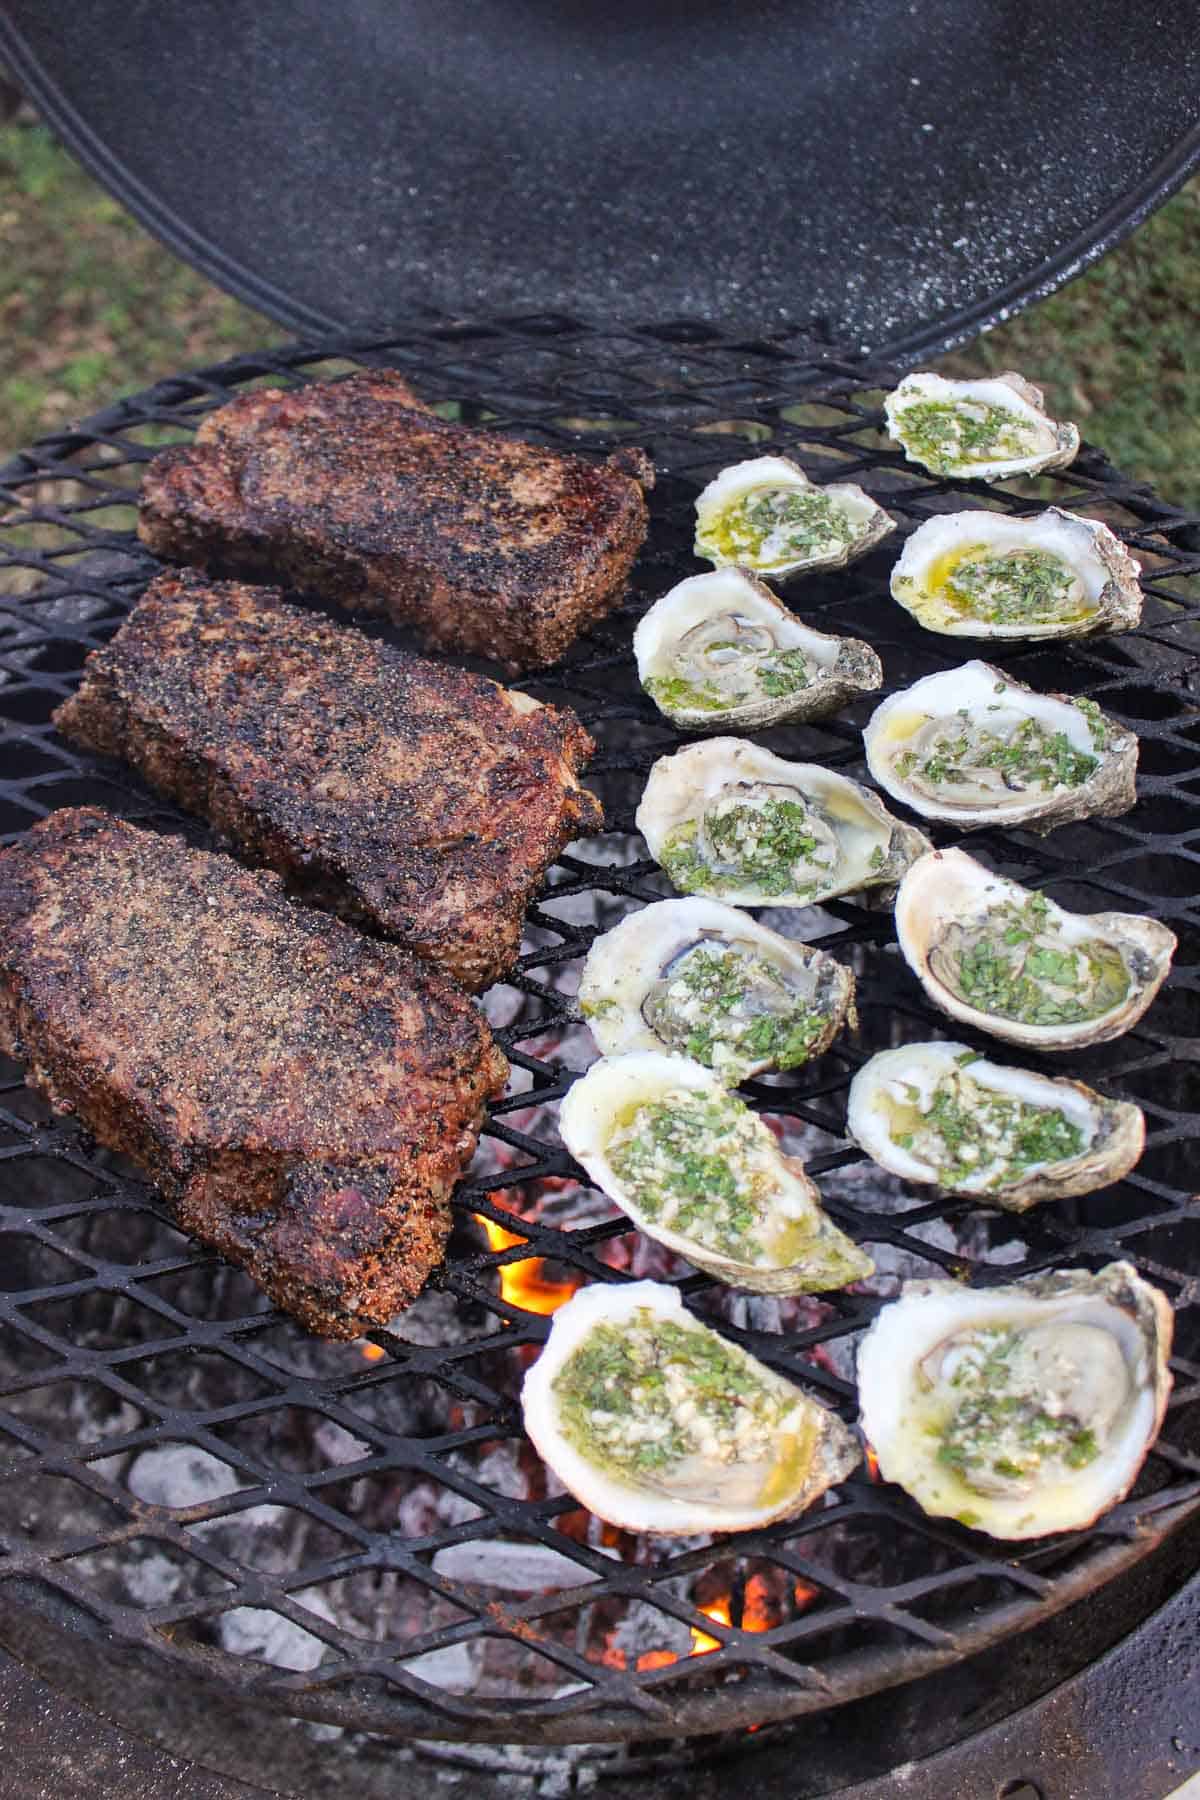 The grilled steak and oysters cooking over the fire.